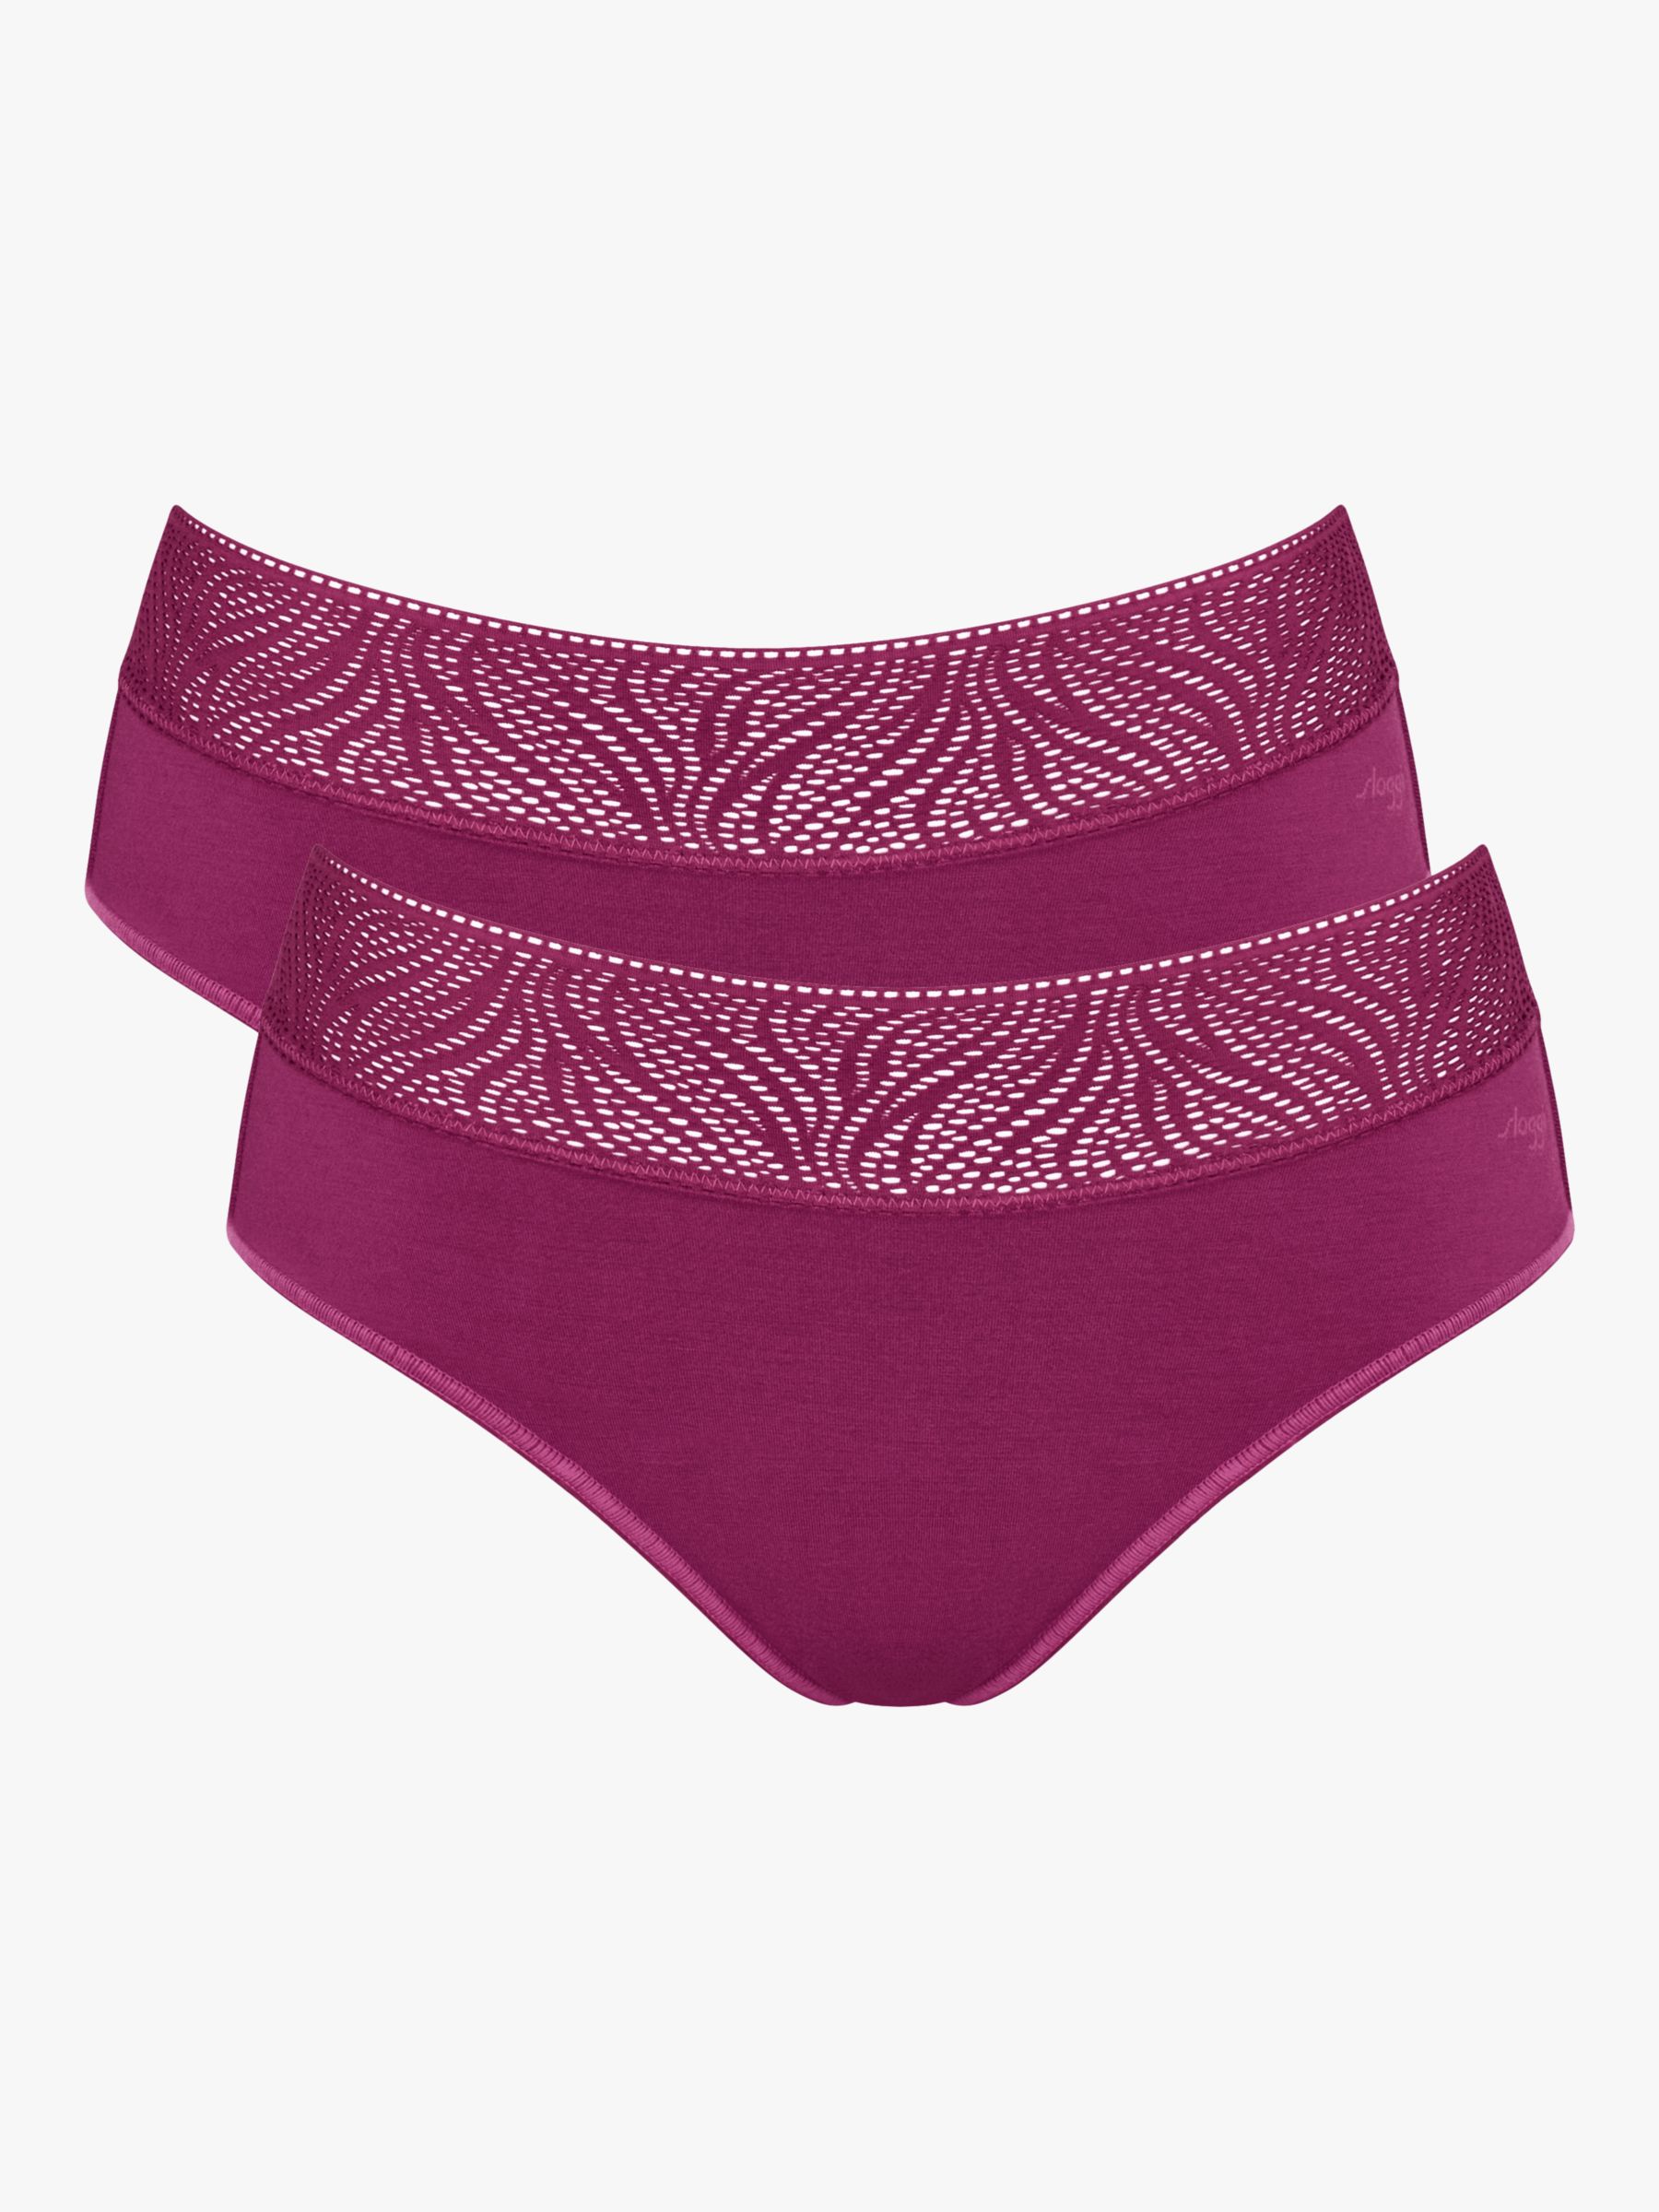 sloggi Medium Absorbency Hipster Period Knickers, Pack of 2, Wine, L